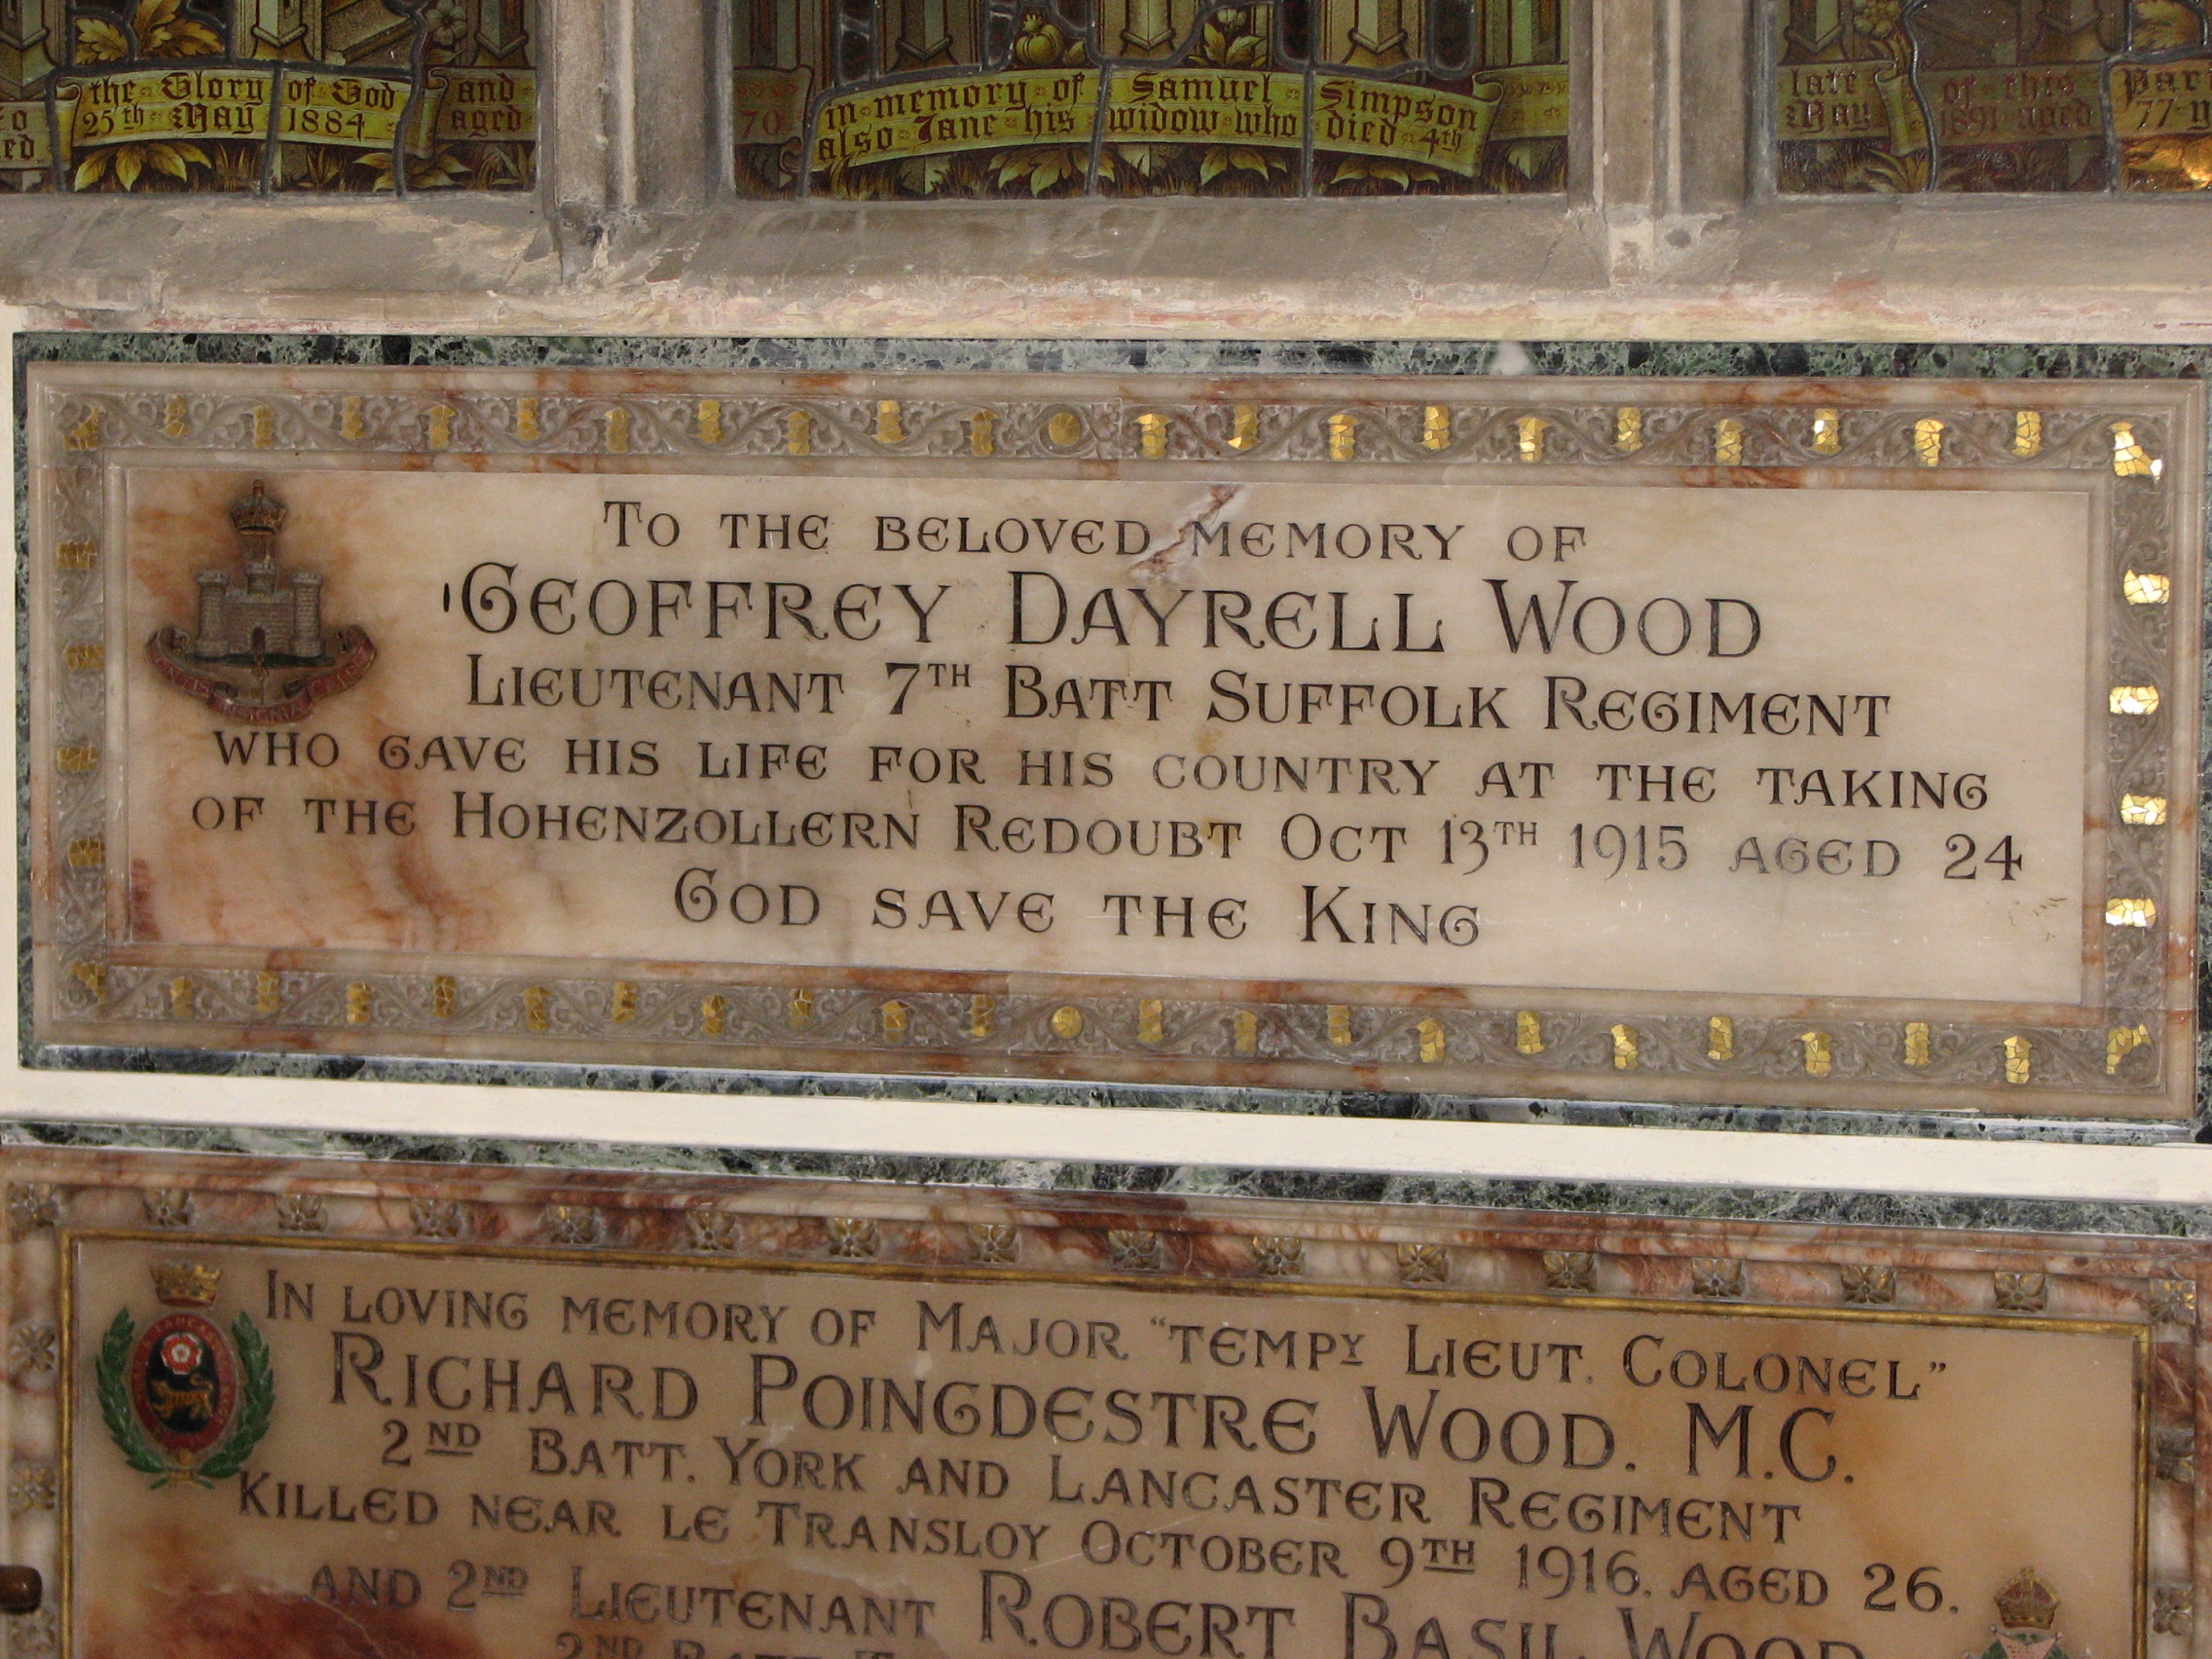 The memorial tablet to Geoffrey, erected by his parents on the South Wall of the Chancel  of St. Mary's Church<br>It incorrectly states that Geoffrey lost his life in the taking of the Hohenzollern Redoubt.  The Redoubt was actually a different  German defensive position approximately 1 km from the site of the 7th Suffolks attack at the Hulluch Quarries.<br />MA